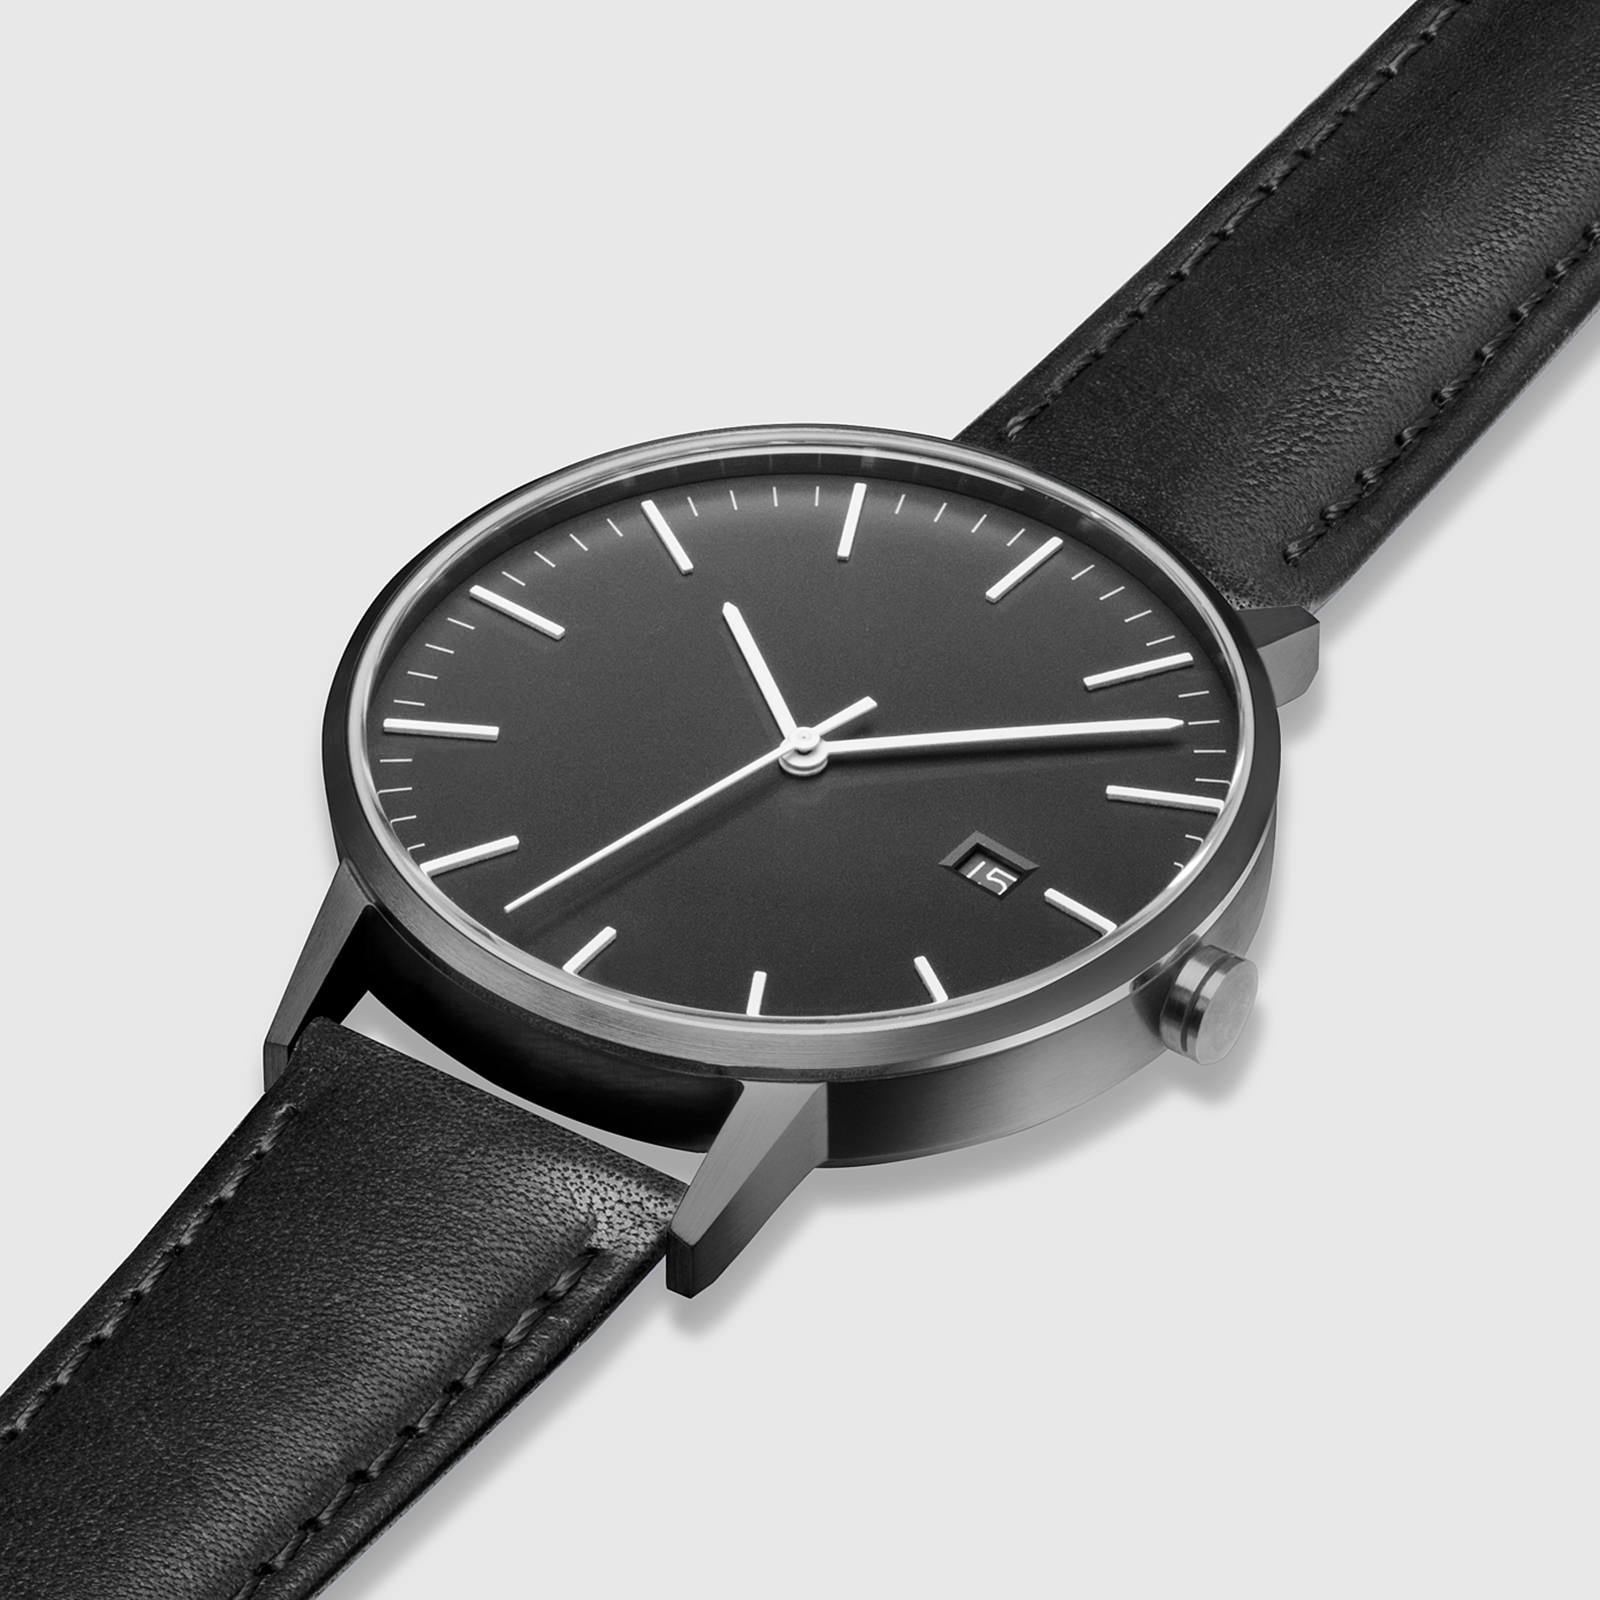 The Minimalist Watch for Men | Linjer